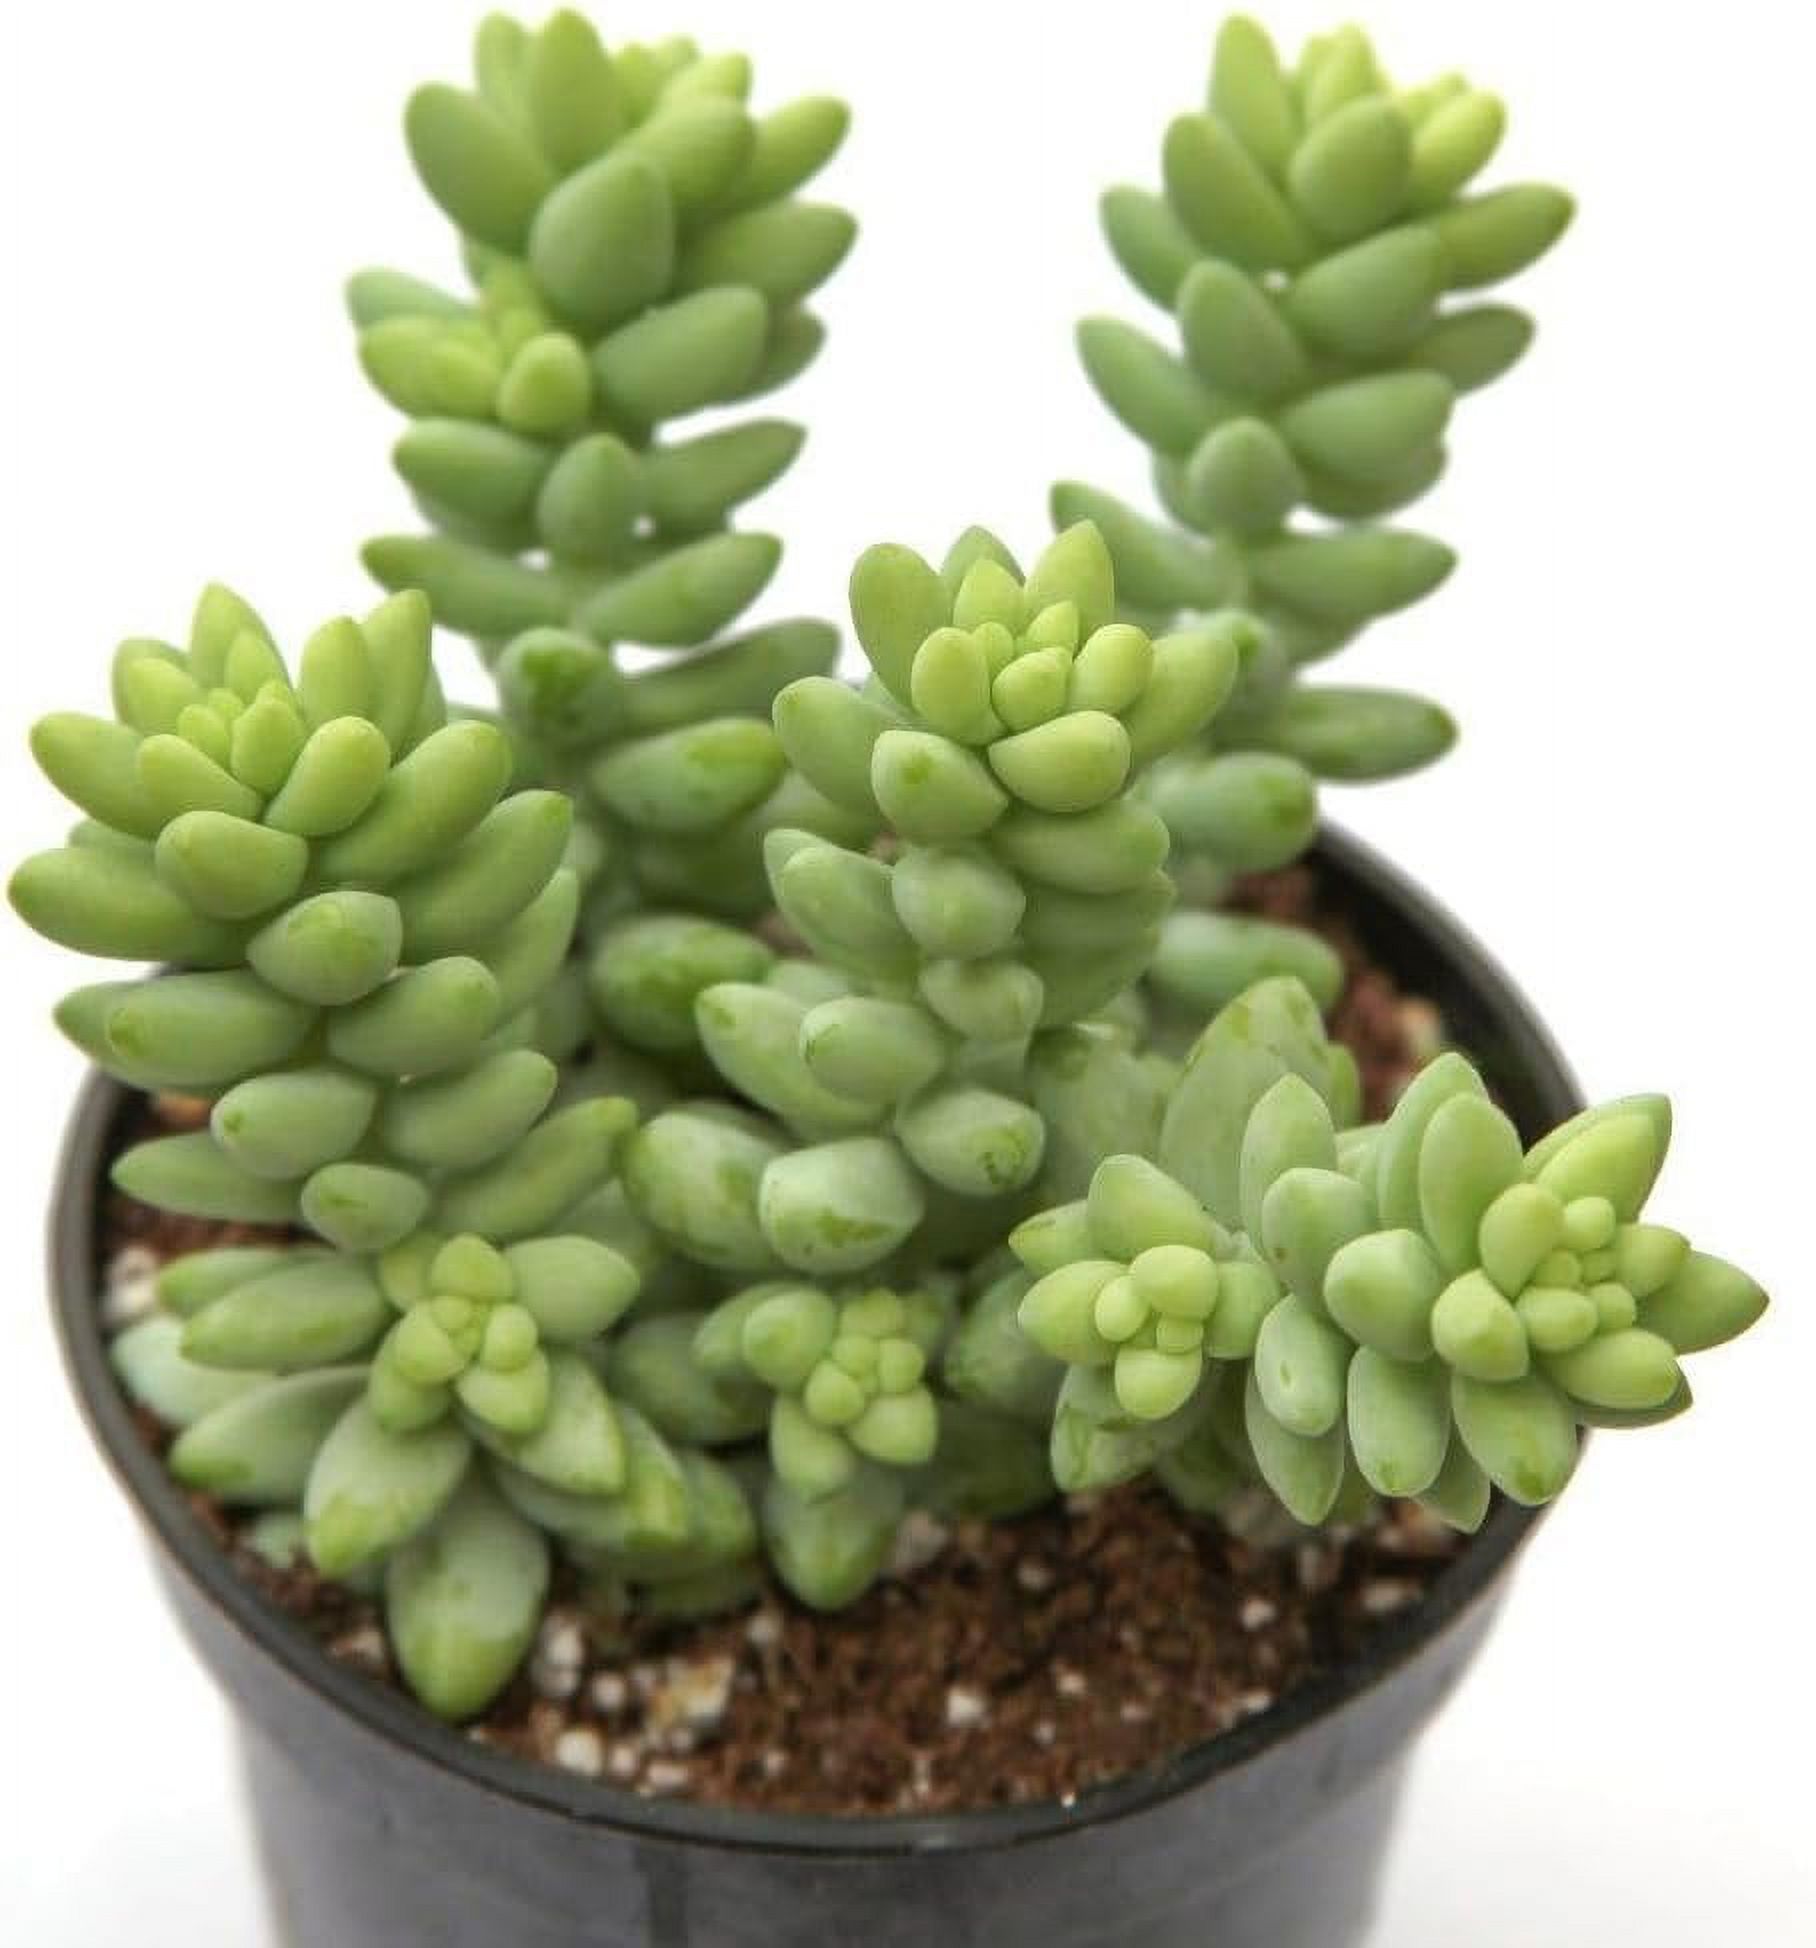 Burro's Tail - Live Starter Plant in a 2 Inch Pot - Sedum Morganianum - Drought Tolerant Indoor Outdoor Easy Care Succulent Houseplant - image 1 of 3